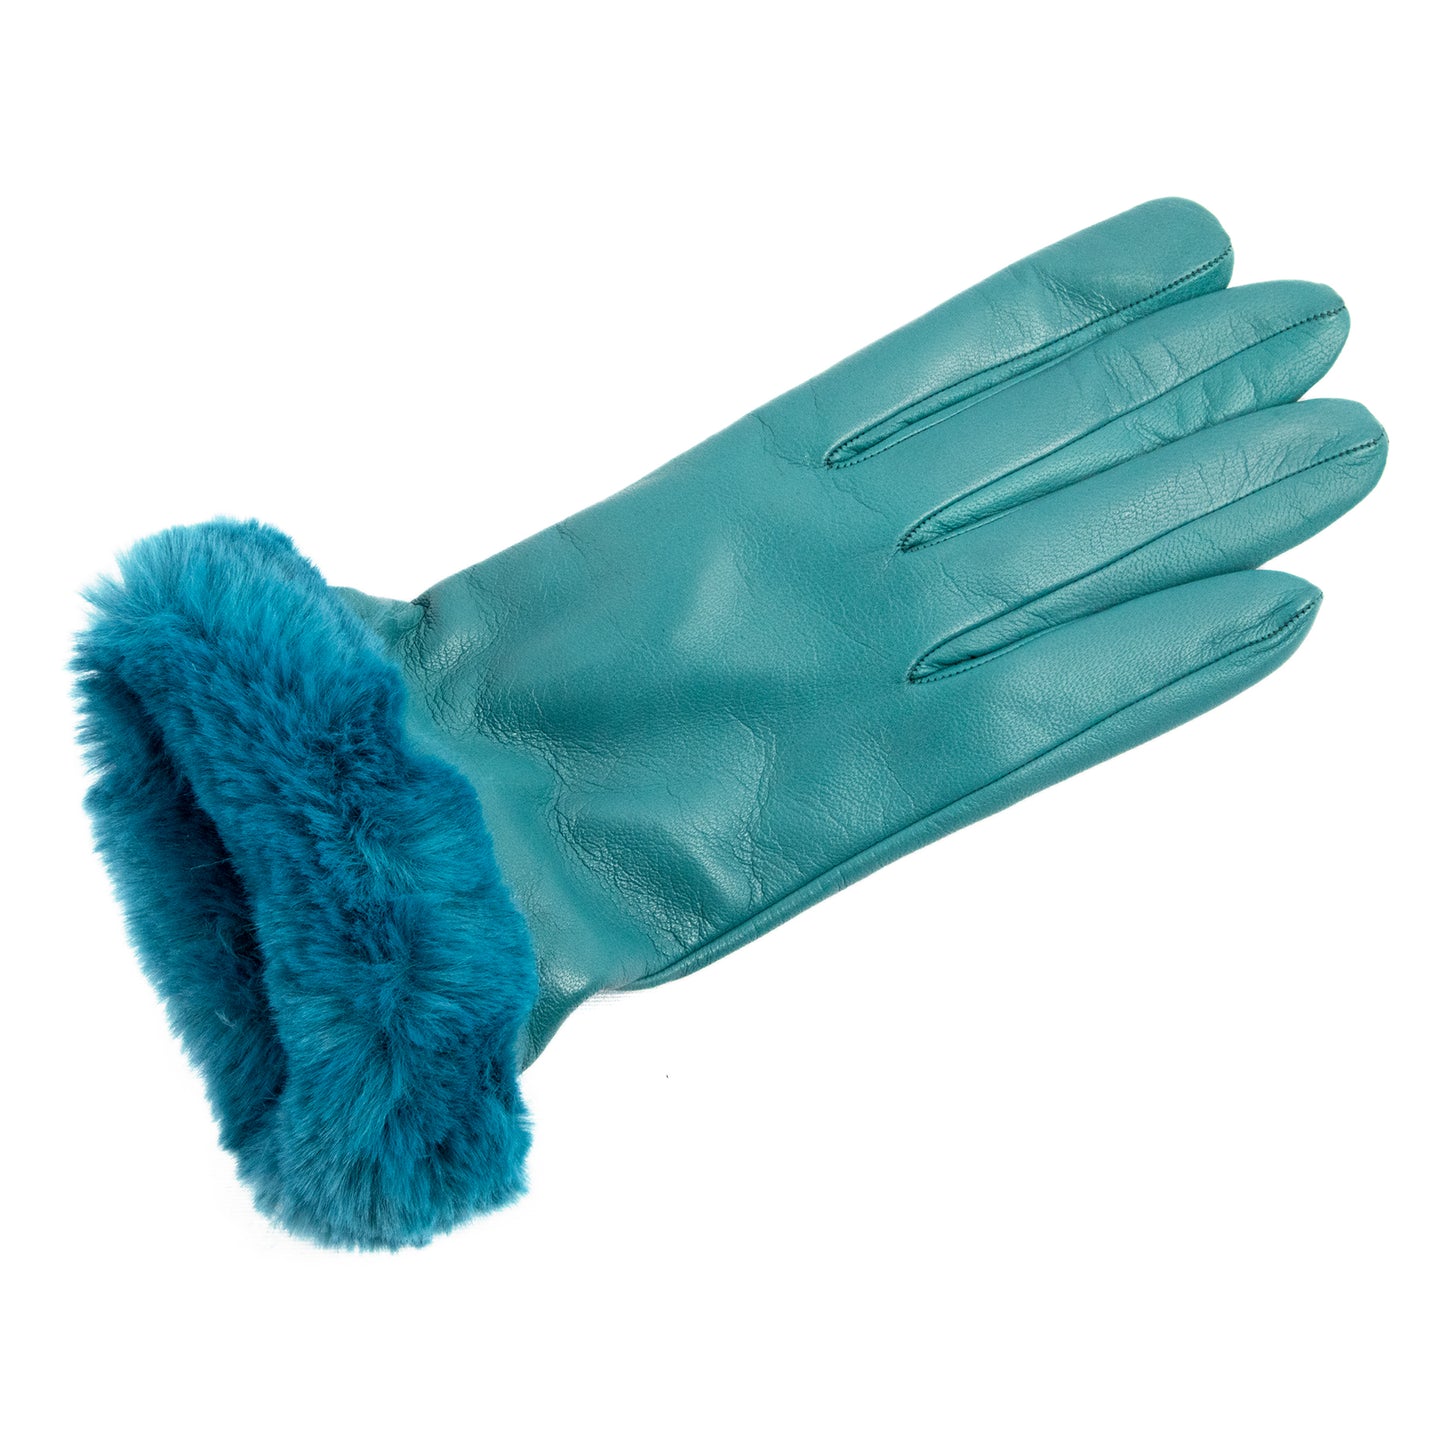 Women's teal nappa leather gloves with faux fur